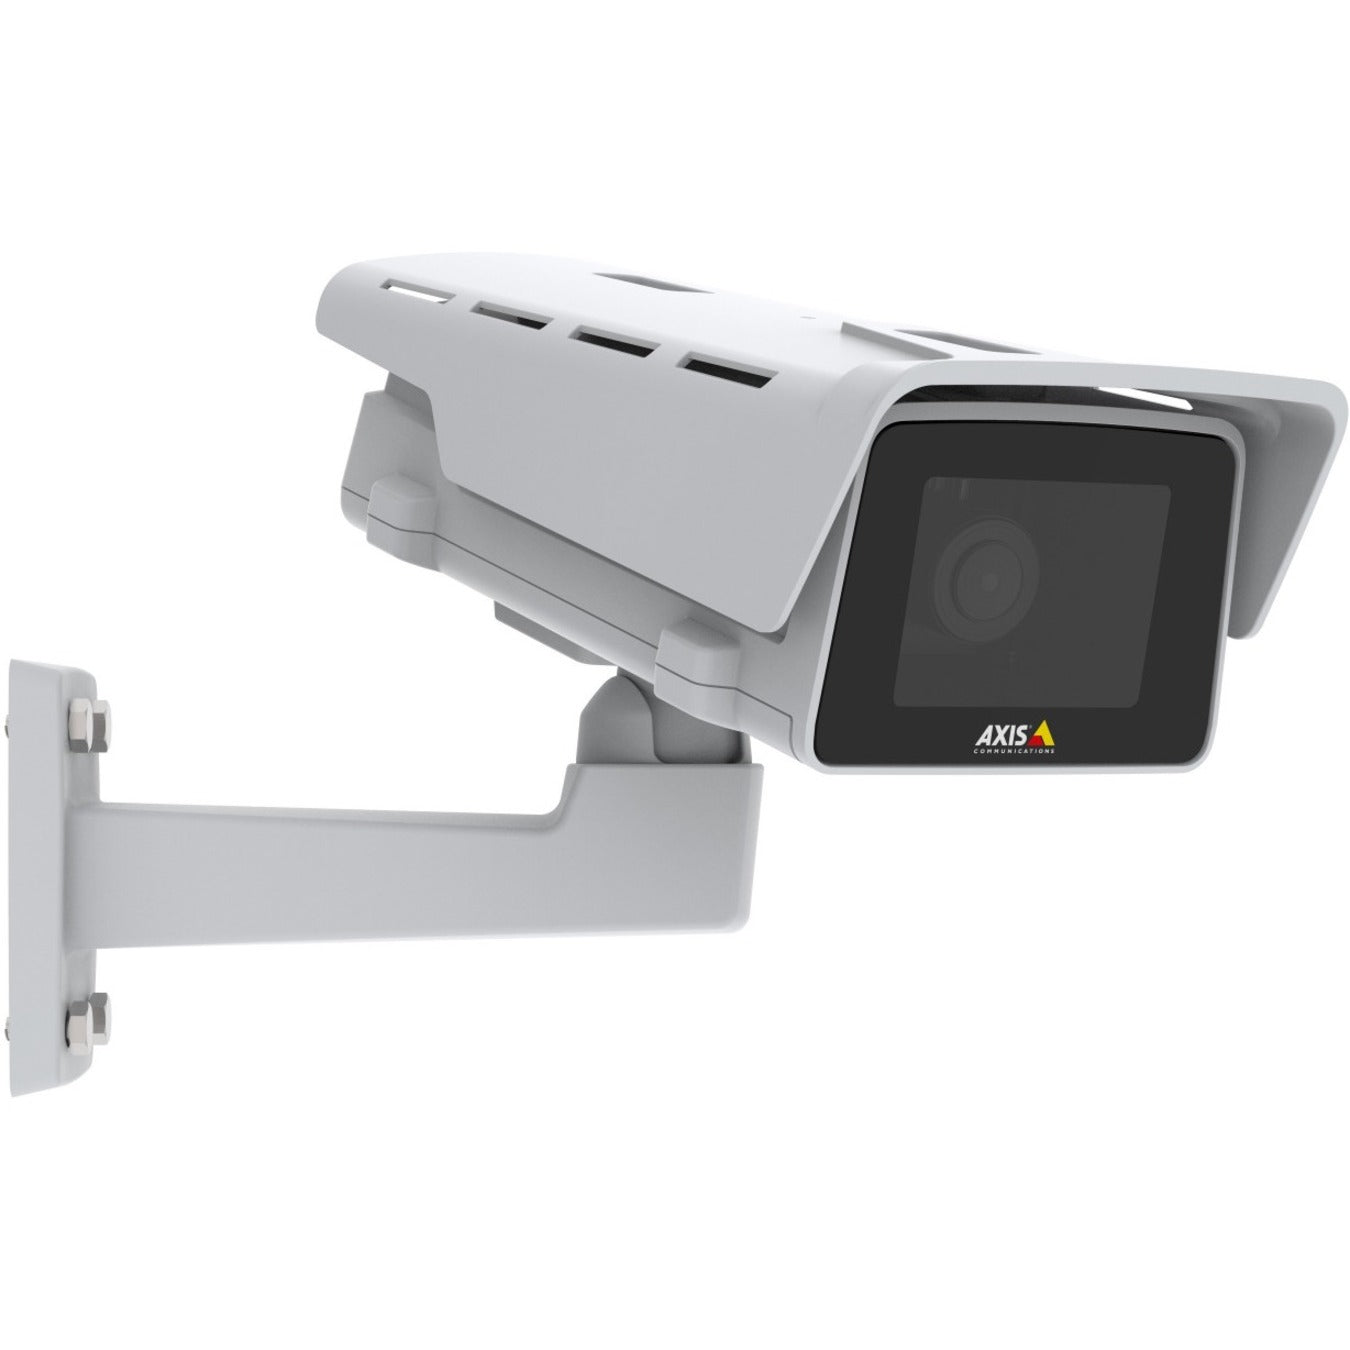 AXIS 01772-001 M1135-E Network Camera, 2 Megapixel Outdoor HD, 3.5x Zoom, H.265/MPEG-H HEVC, 30 fps, 1920 x 1080